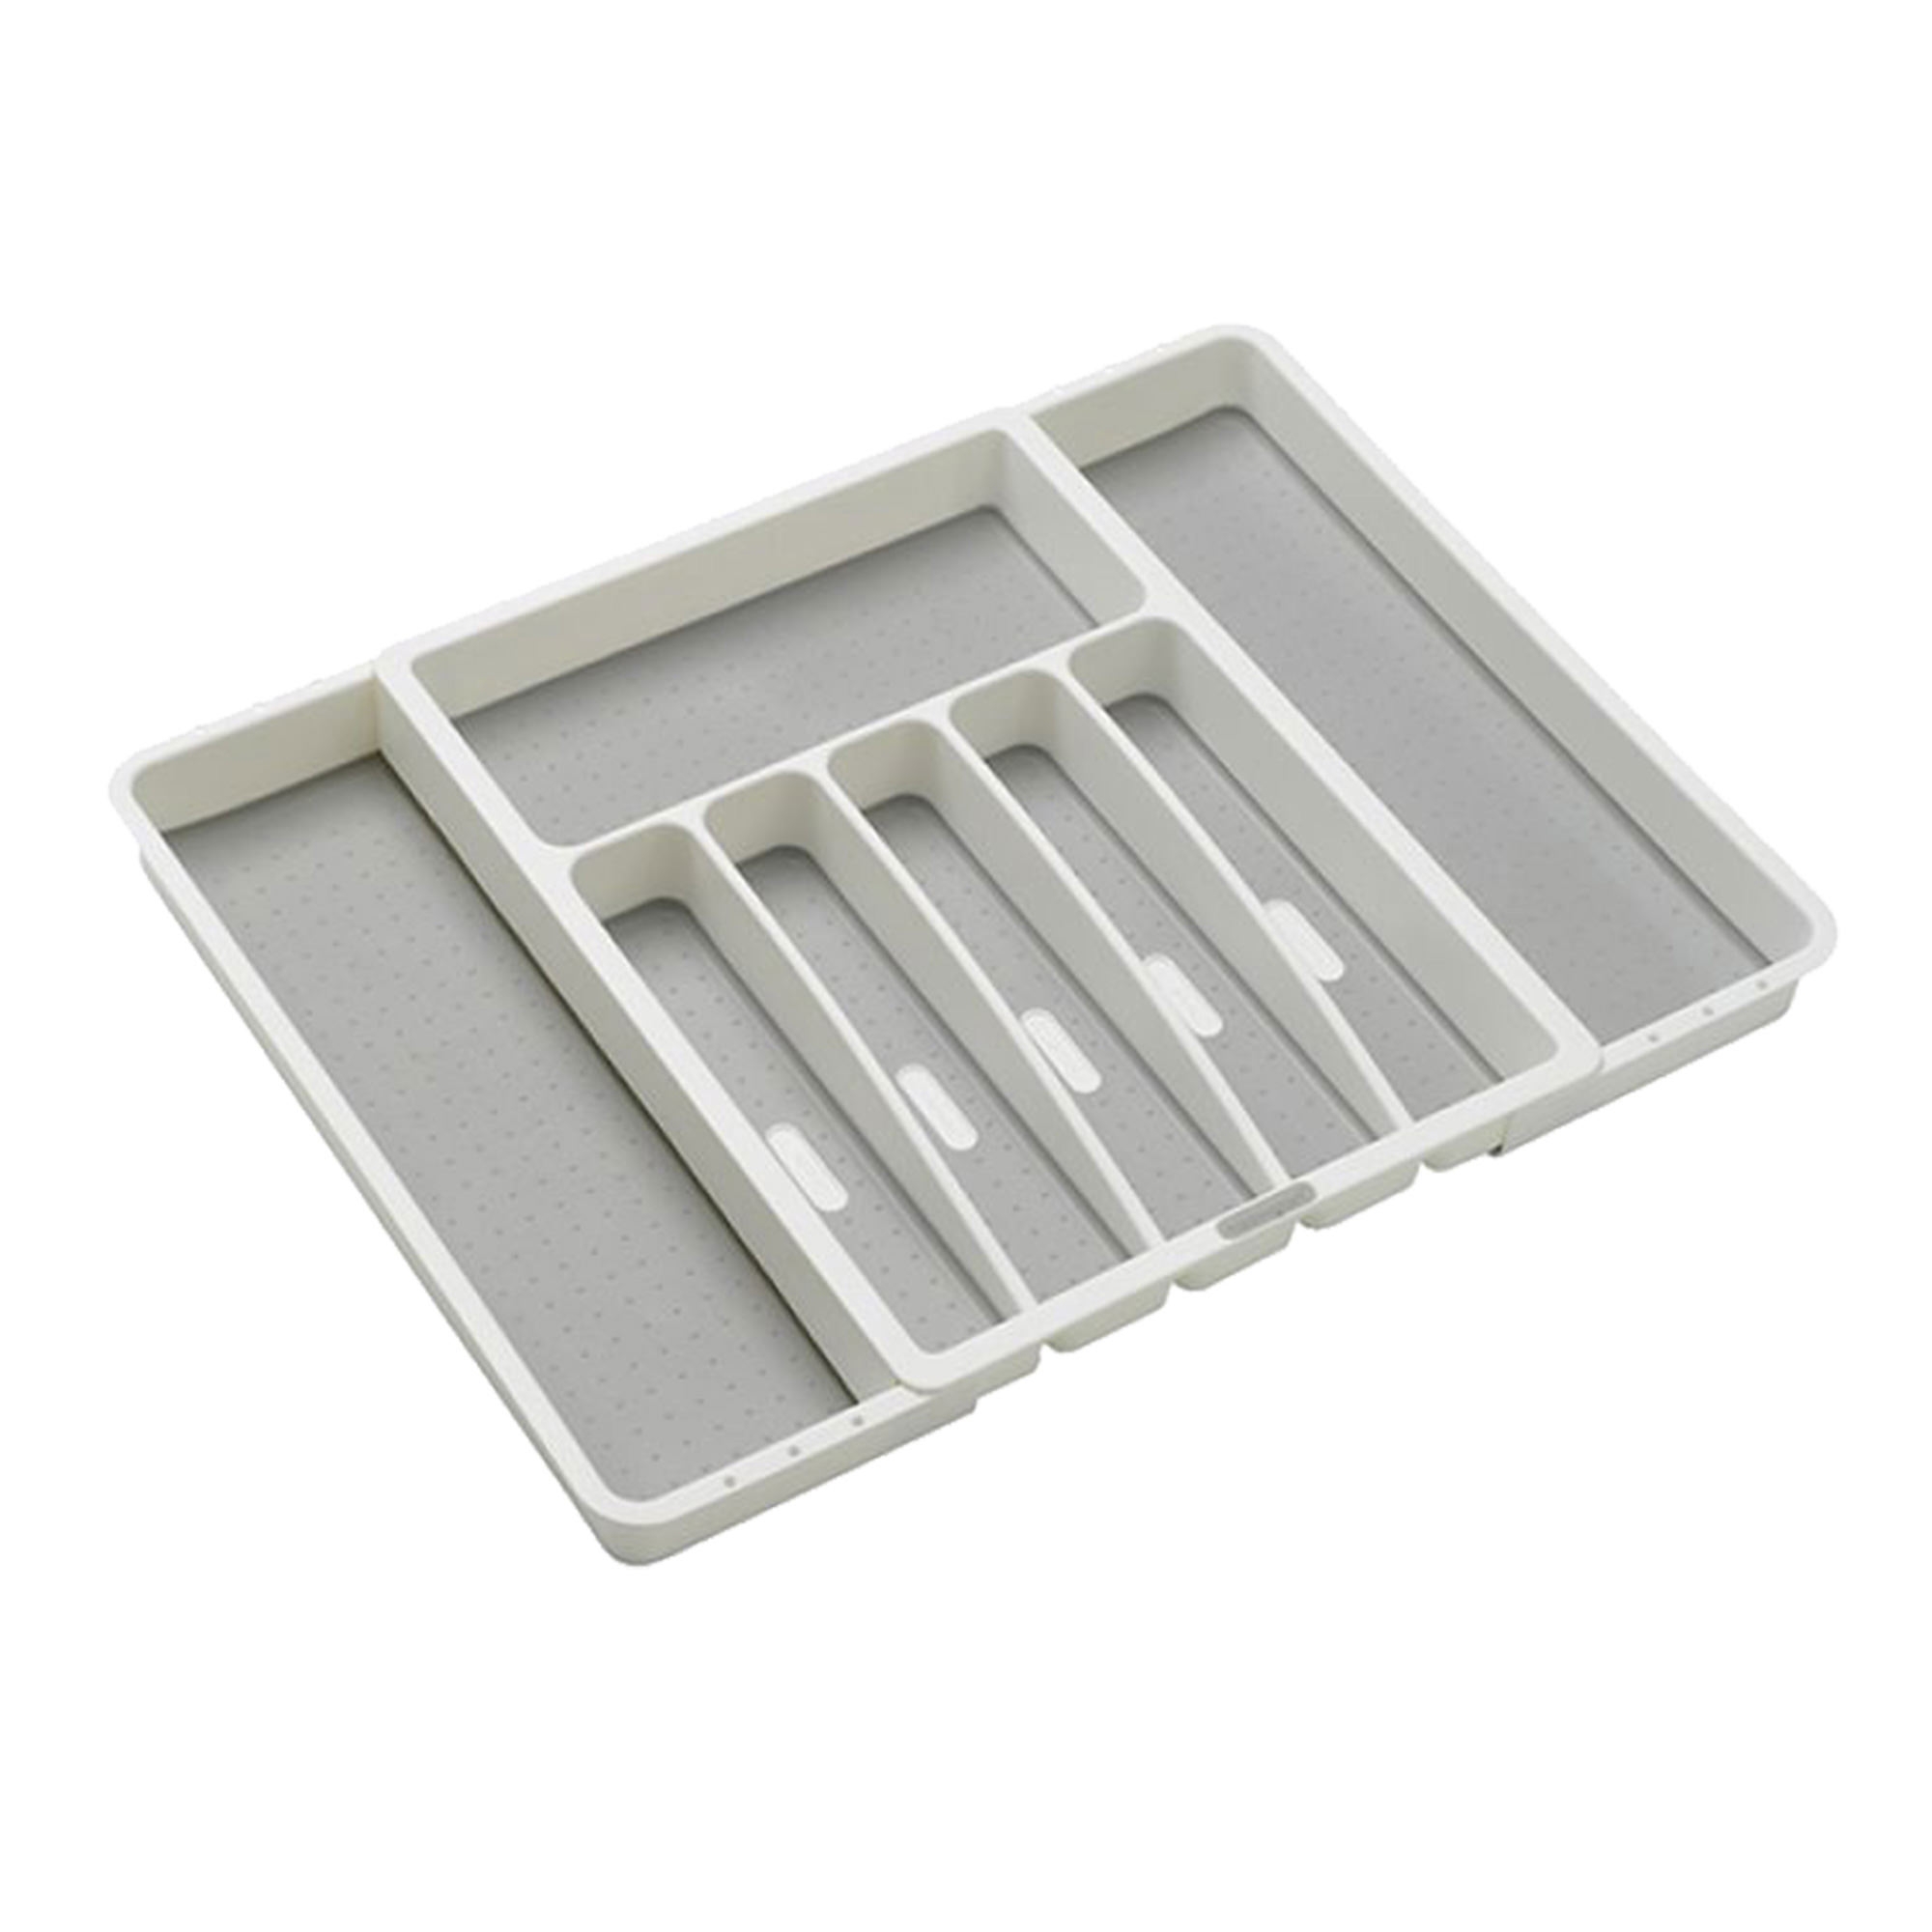 Madesmart Expandable Cutlery Tray White Image 1